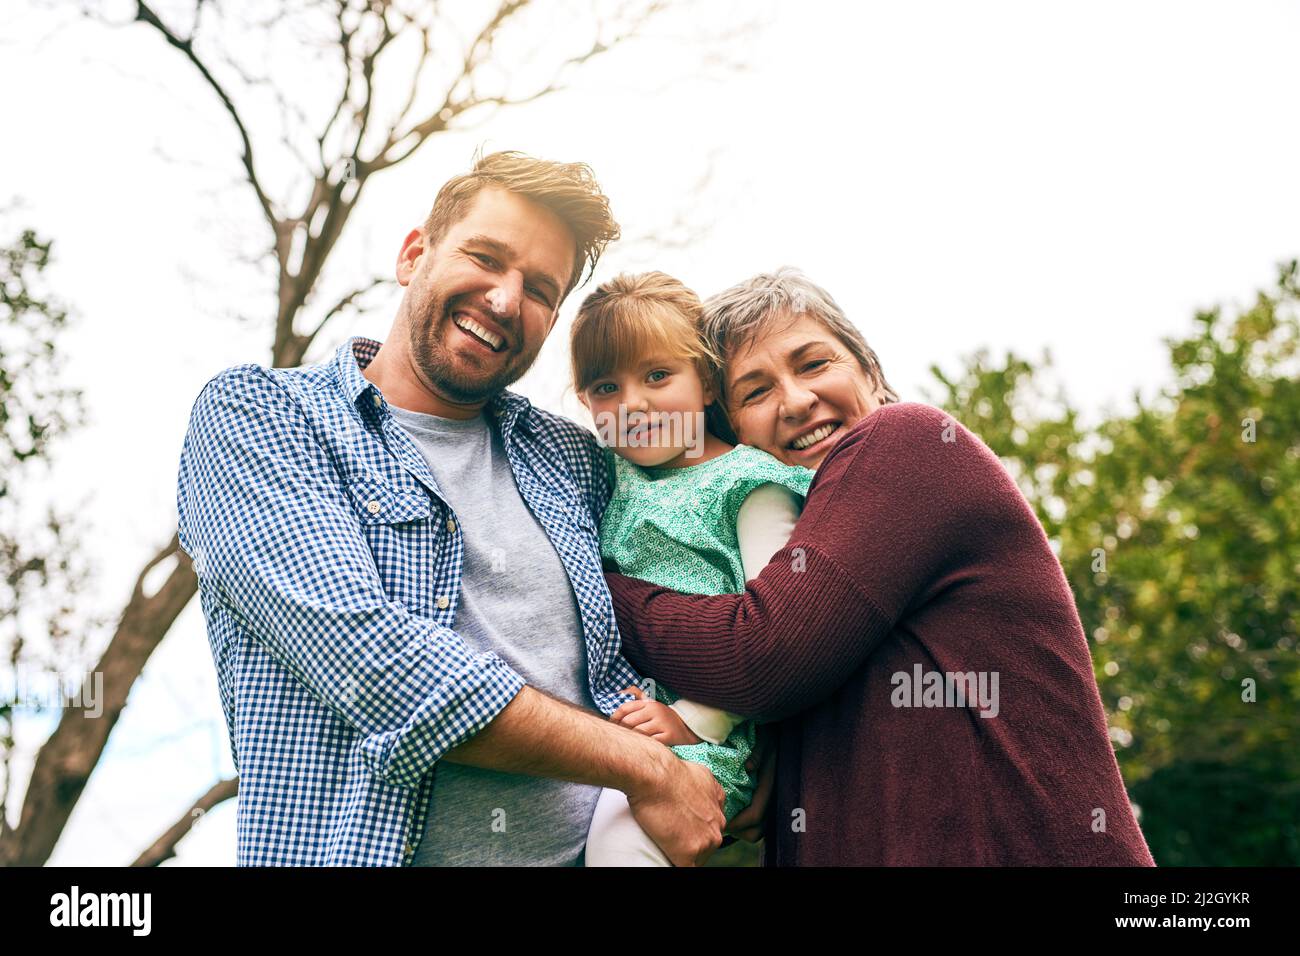 Embracing the love of family. Shot of a multigenerational family outside. Stock Photo